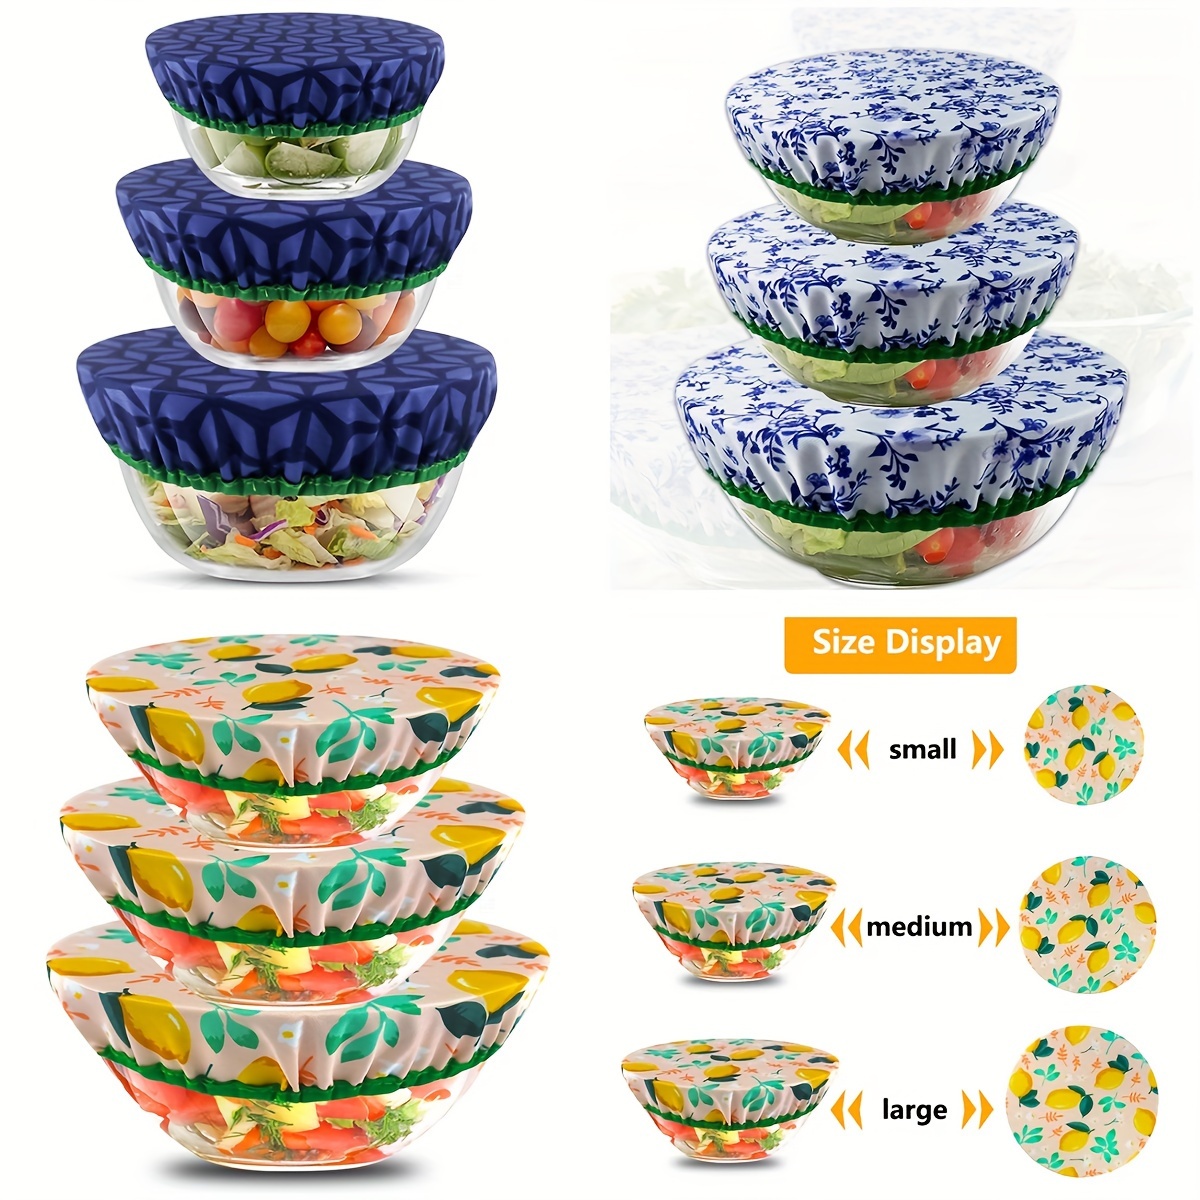 Reusable Bowl Covers, Set of 8